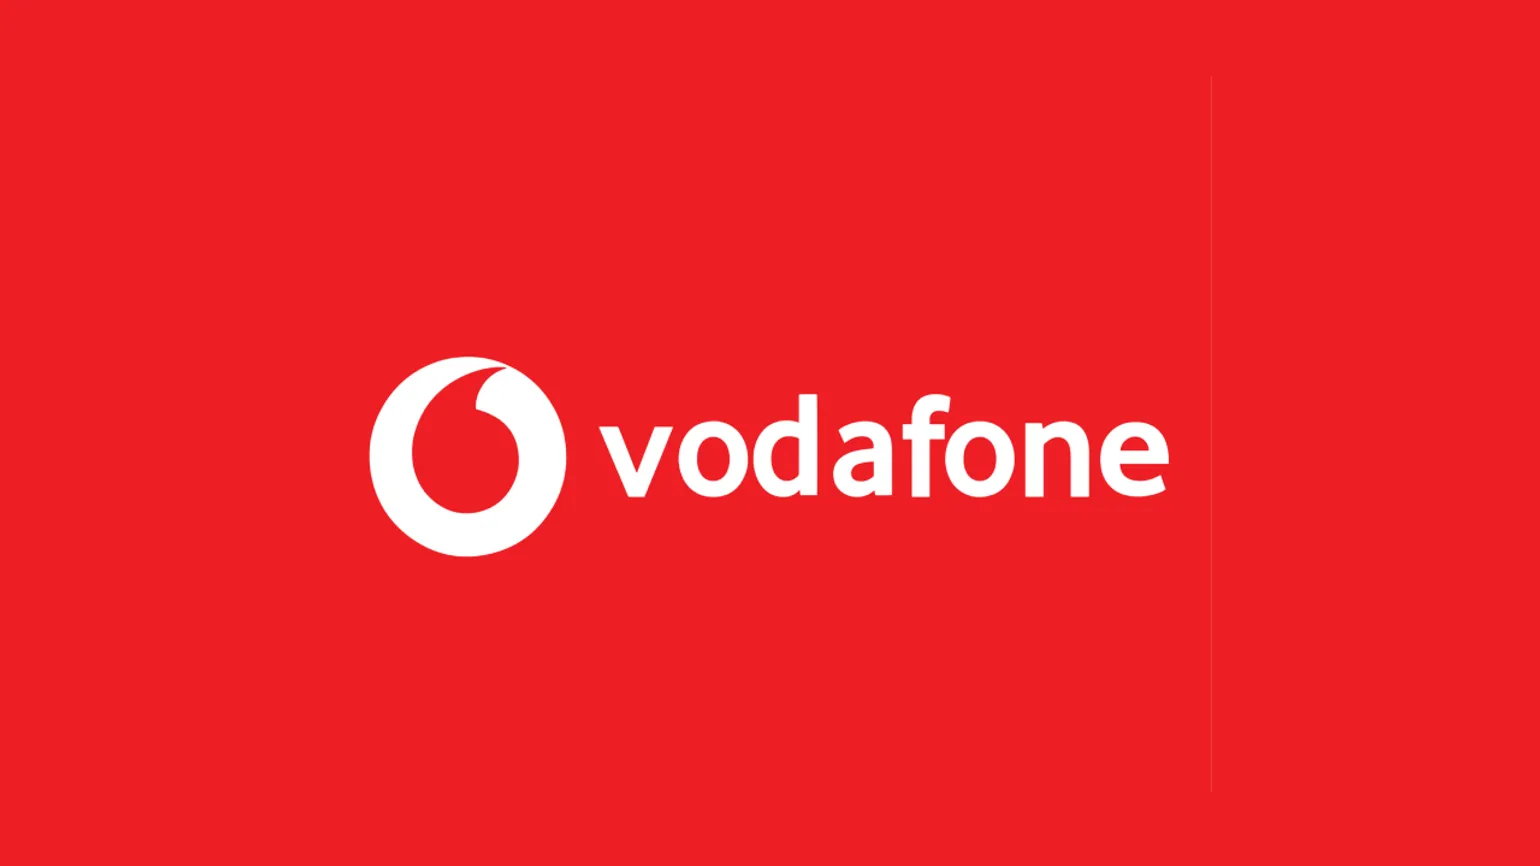 Vodafone review - a reasonable choice for most people